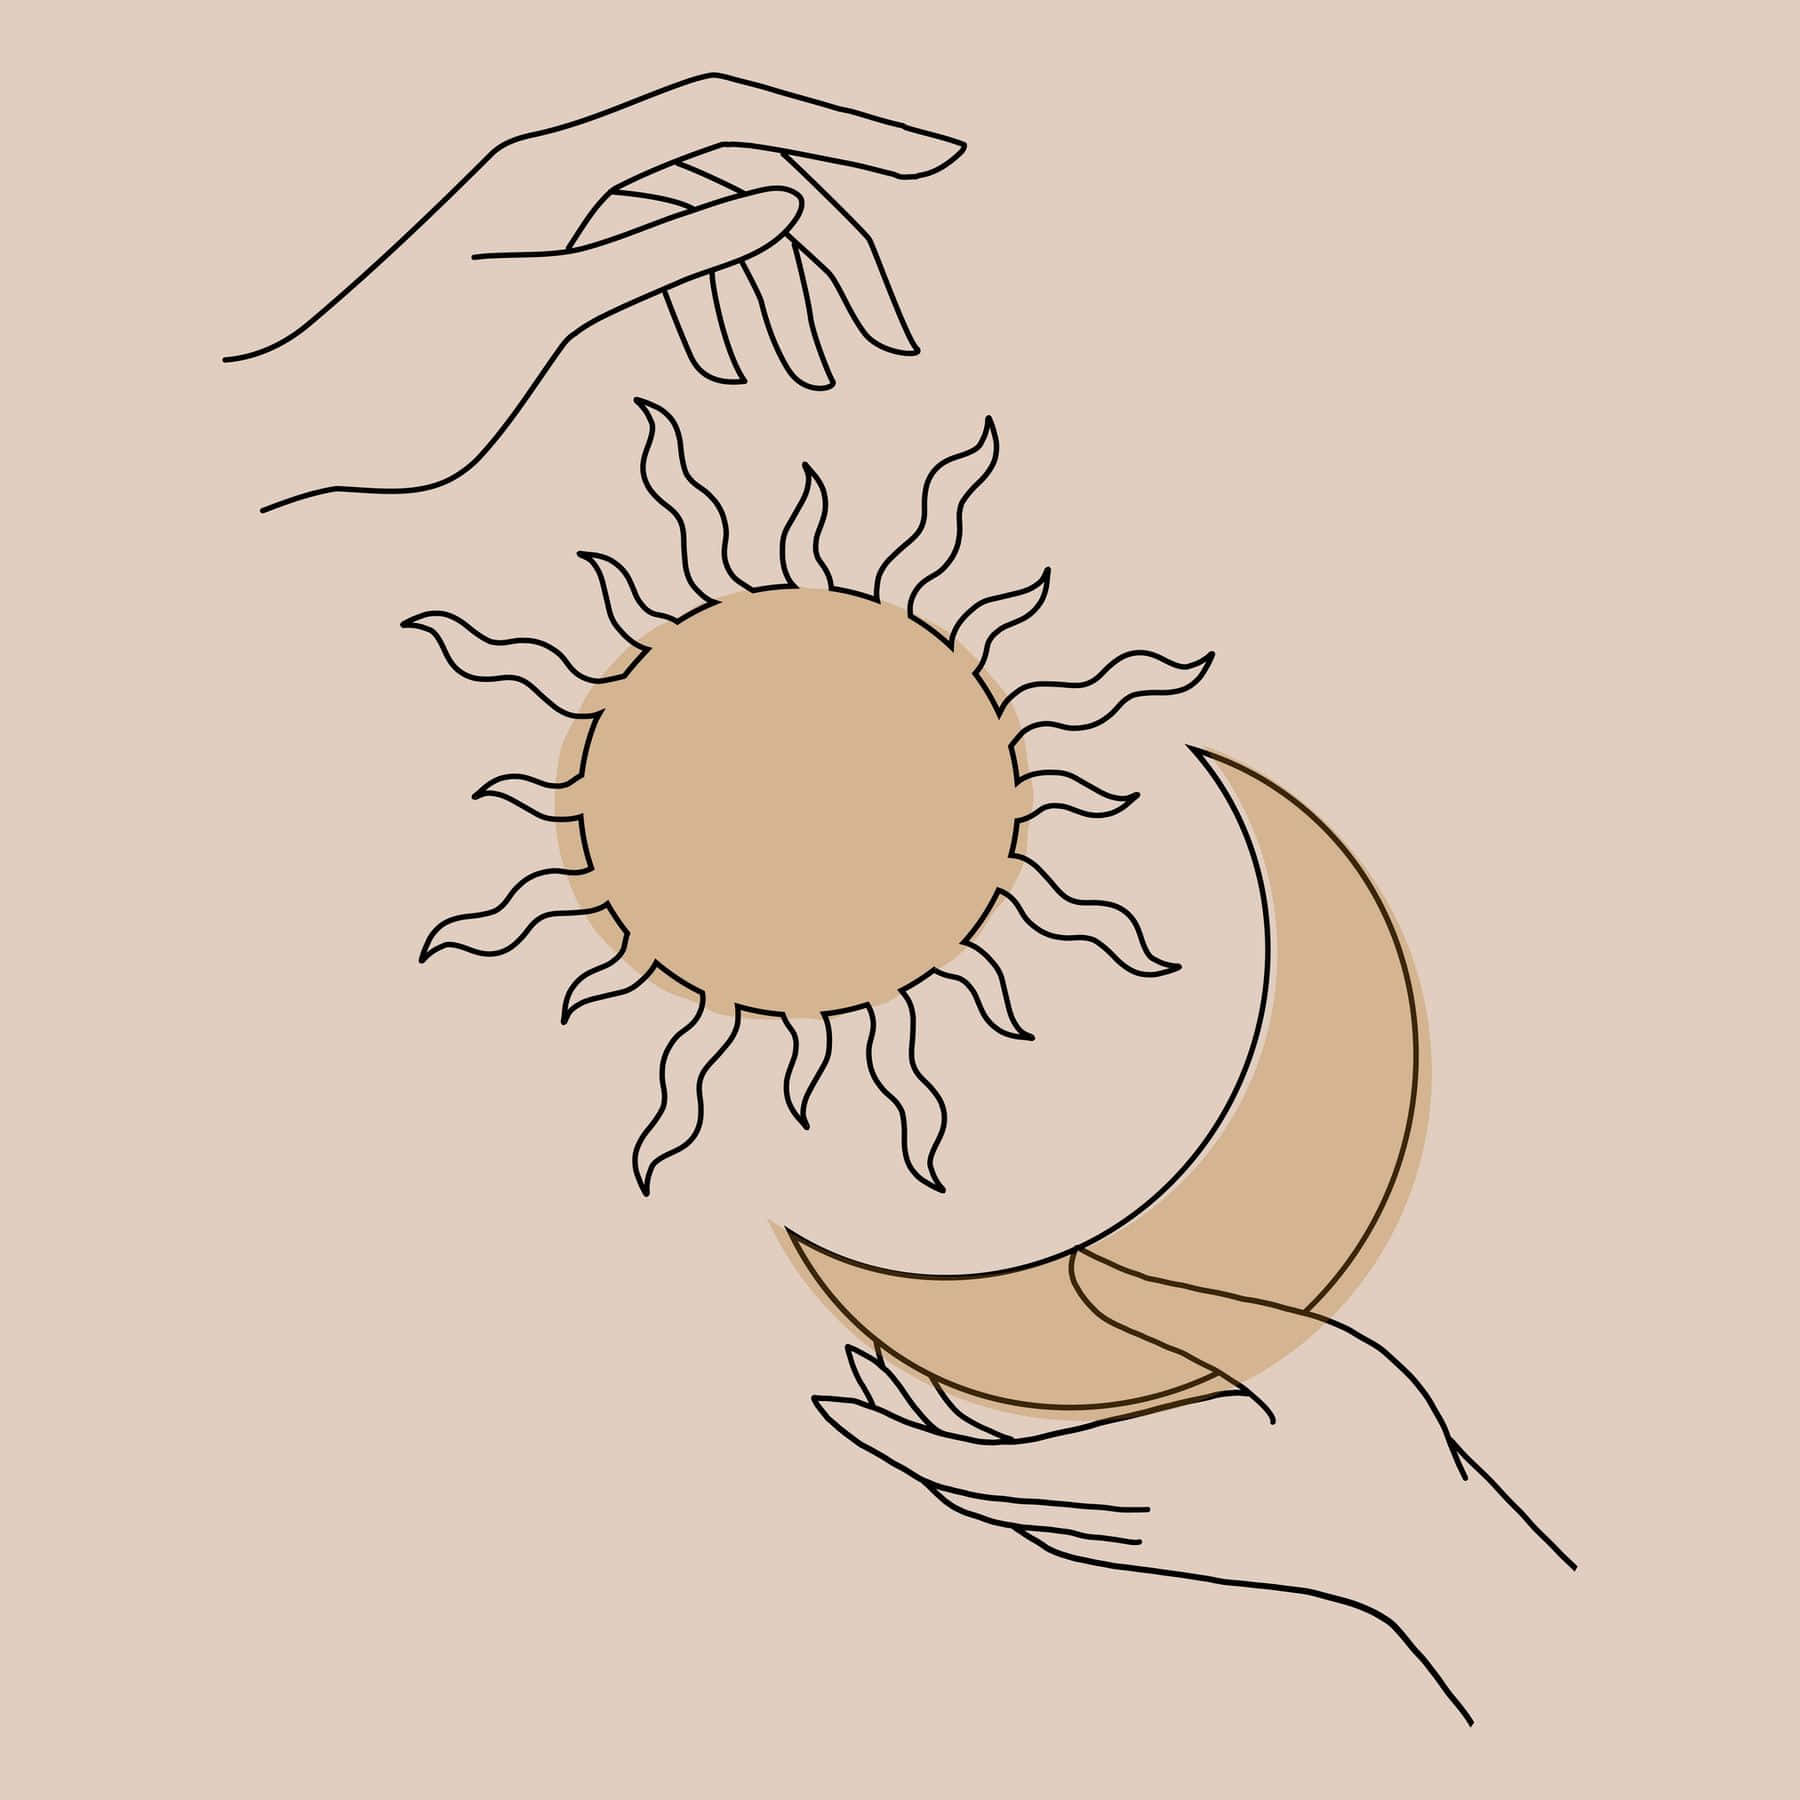 The Sun And Moon Are In The Hands Of Two People Wallpaper